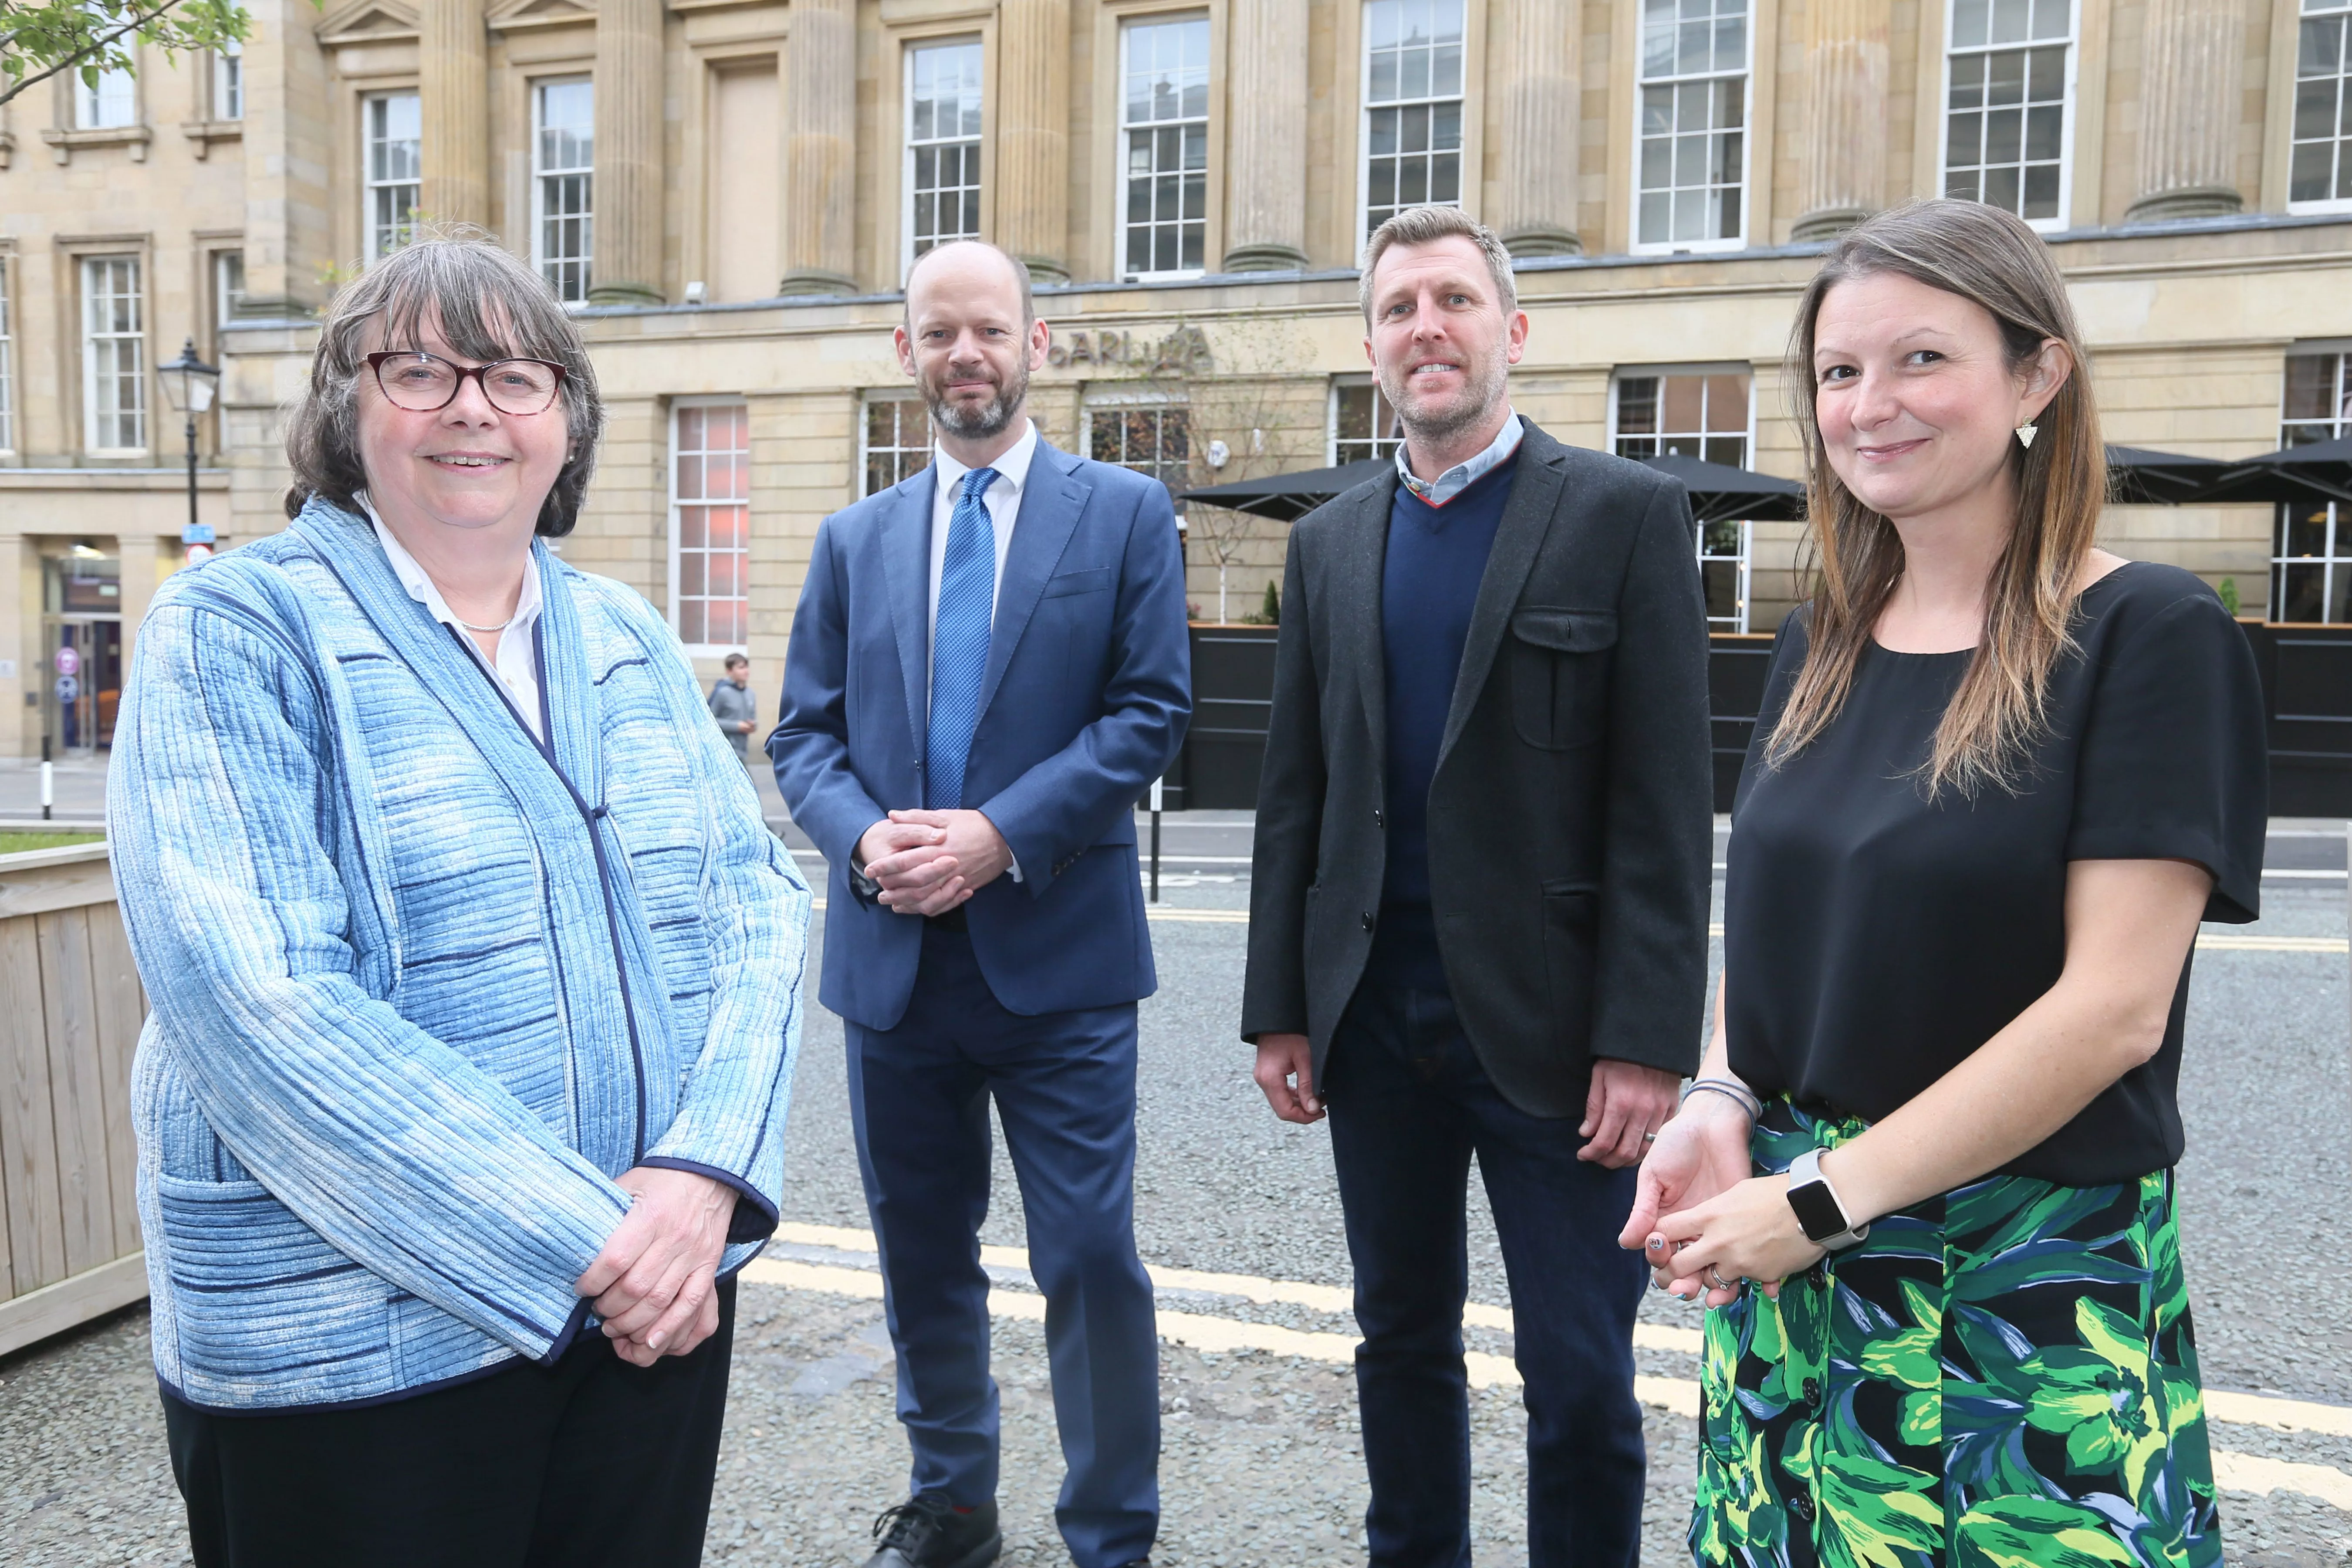 Photo of Cllr Joyce McCarty, Cabinet Member for Inclusive Economy, Newcastle City Council, Mayor Jamie Driscoll, North of Tyne Combined Authority, James Hall, Executive Director, Monstarlab UK, and Jennifer Hartley, Director of Invest Newcastle, NewcastleGateshead Initiative.